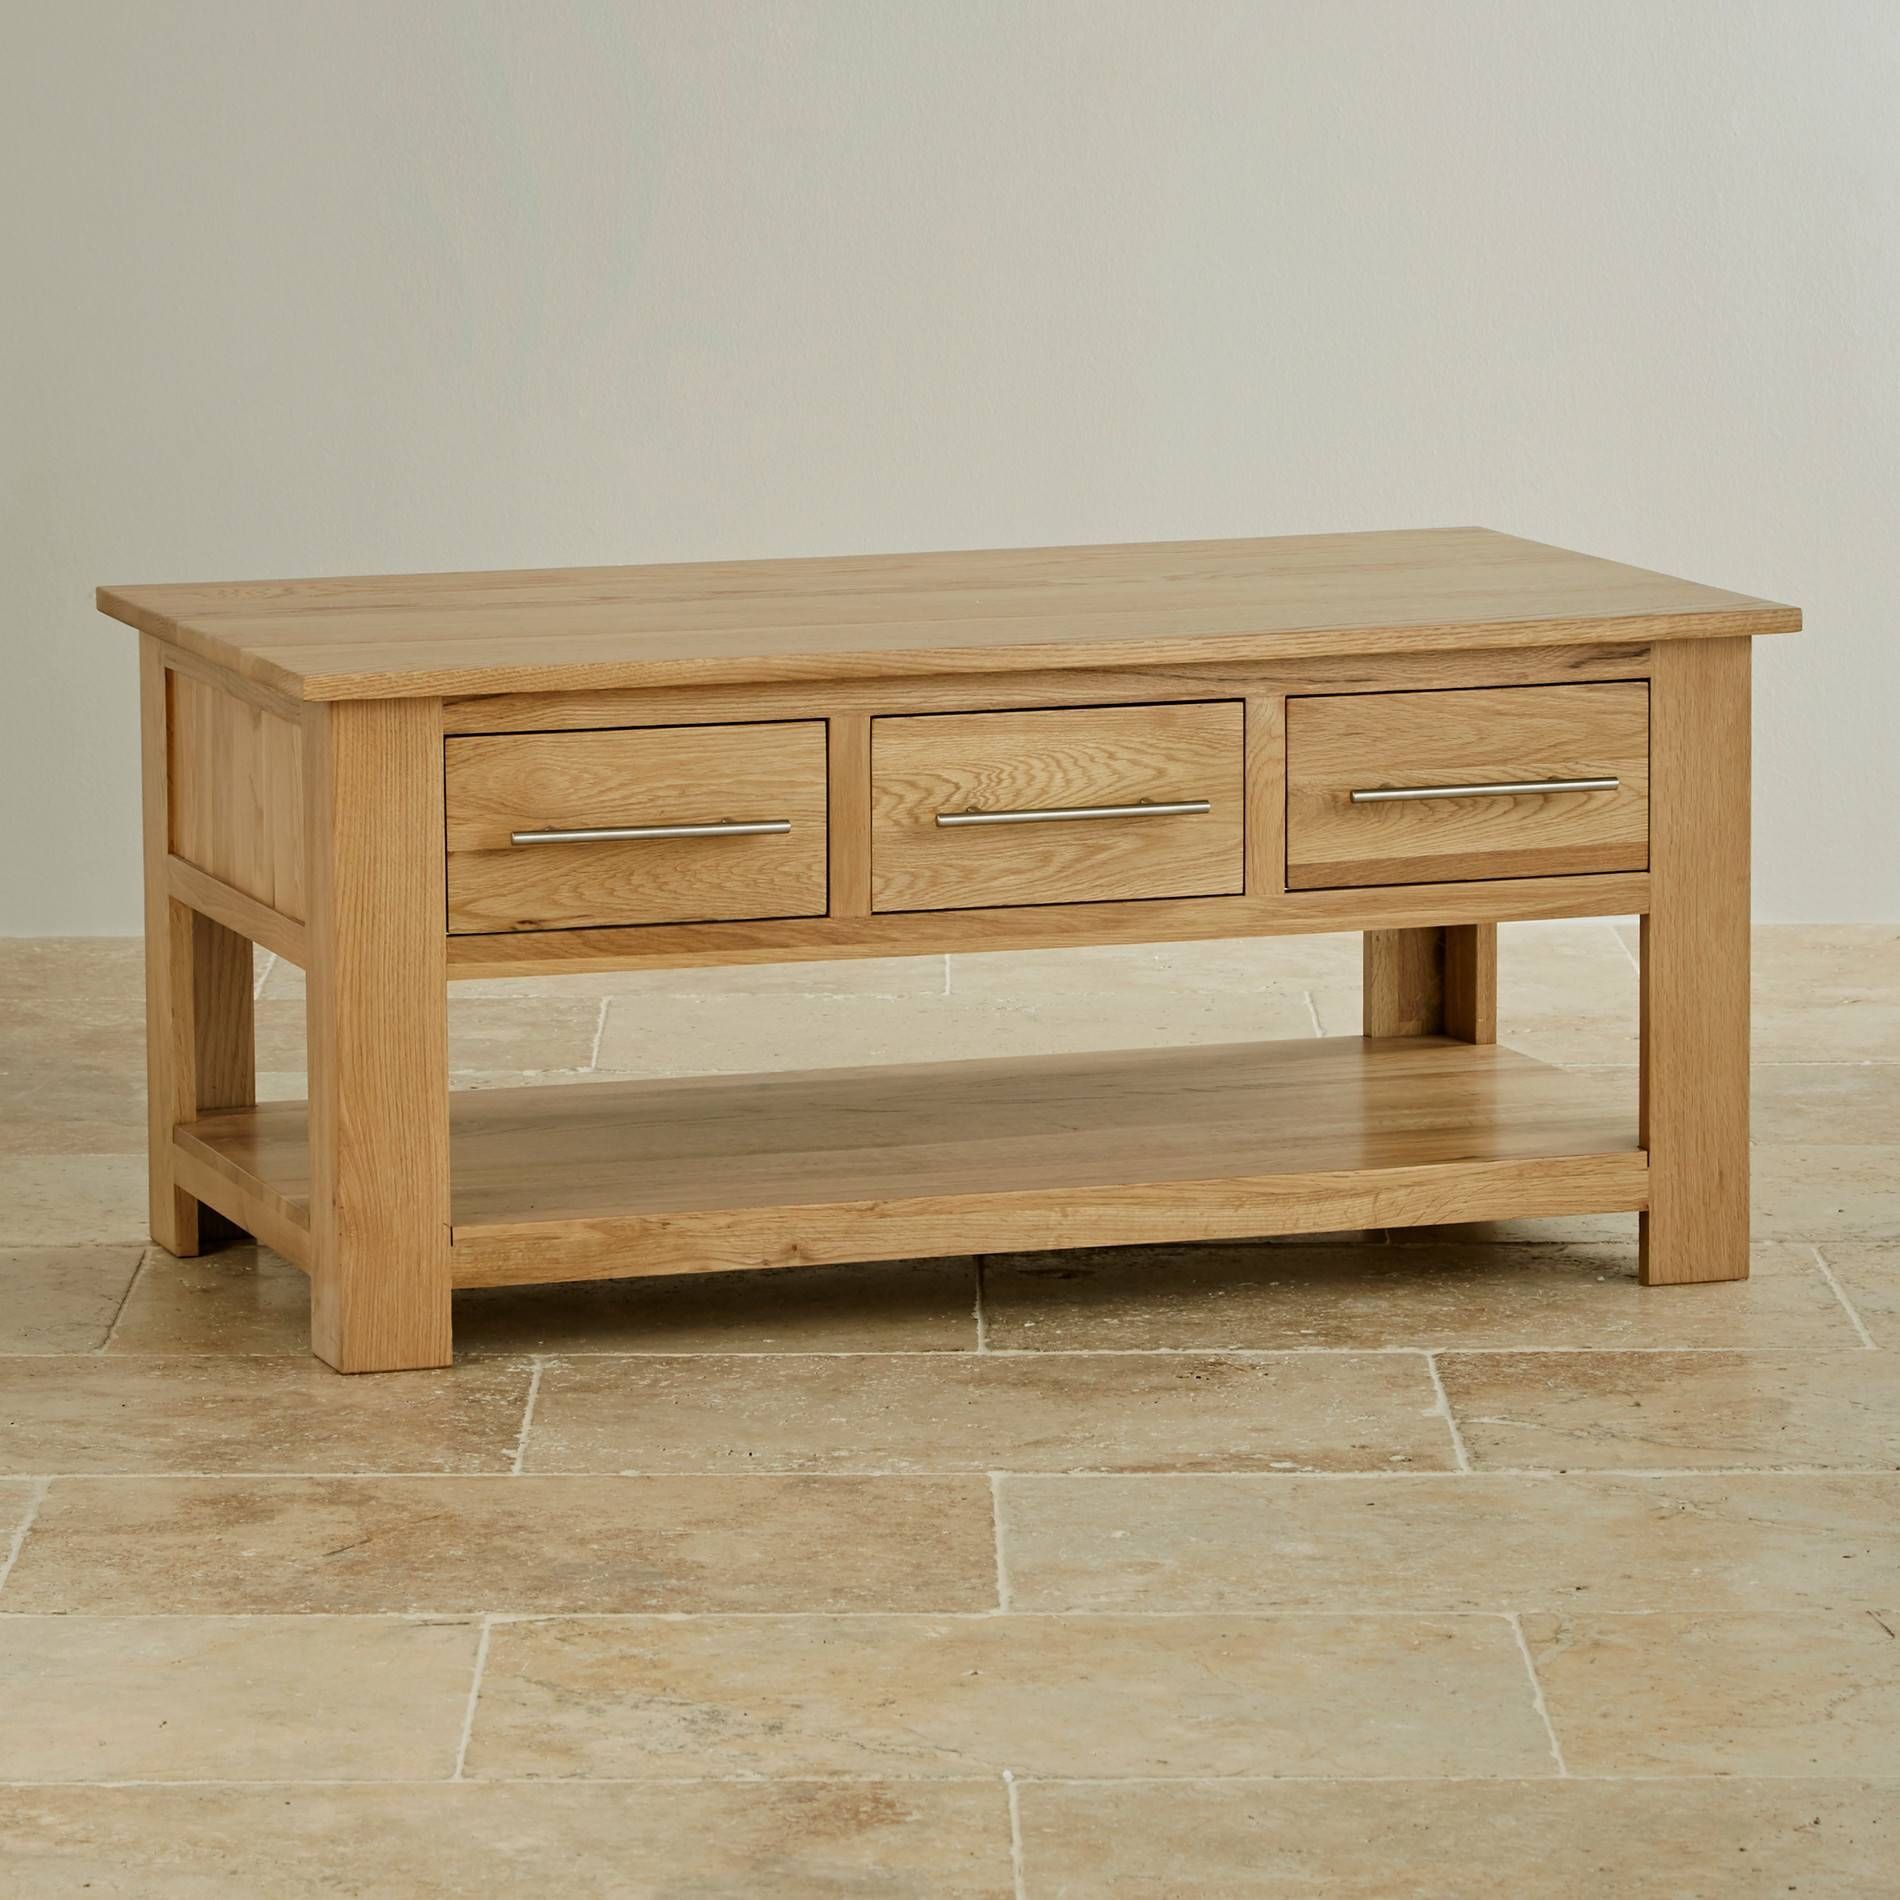 Rivermead 6 Drawer Coffee Table In Natural Solid Oak For Oak Coffee Tables With Storage (View 1 of 15)